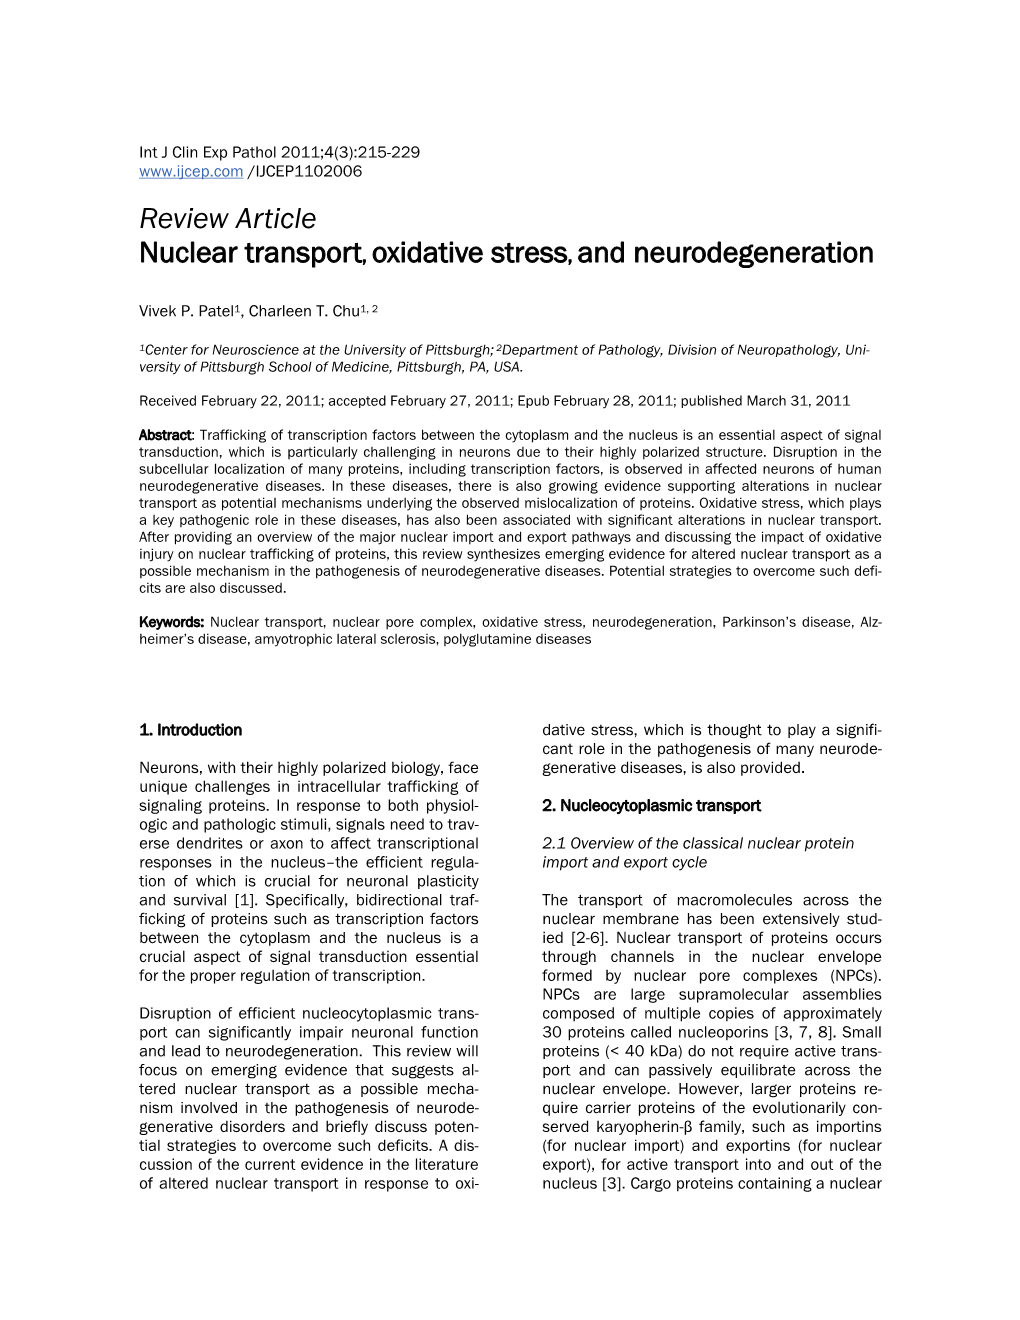 Review Article Nuclear Transport, Oxidative Stress, and Neurodegeneration